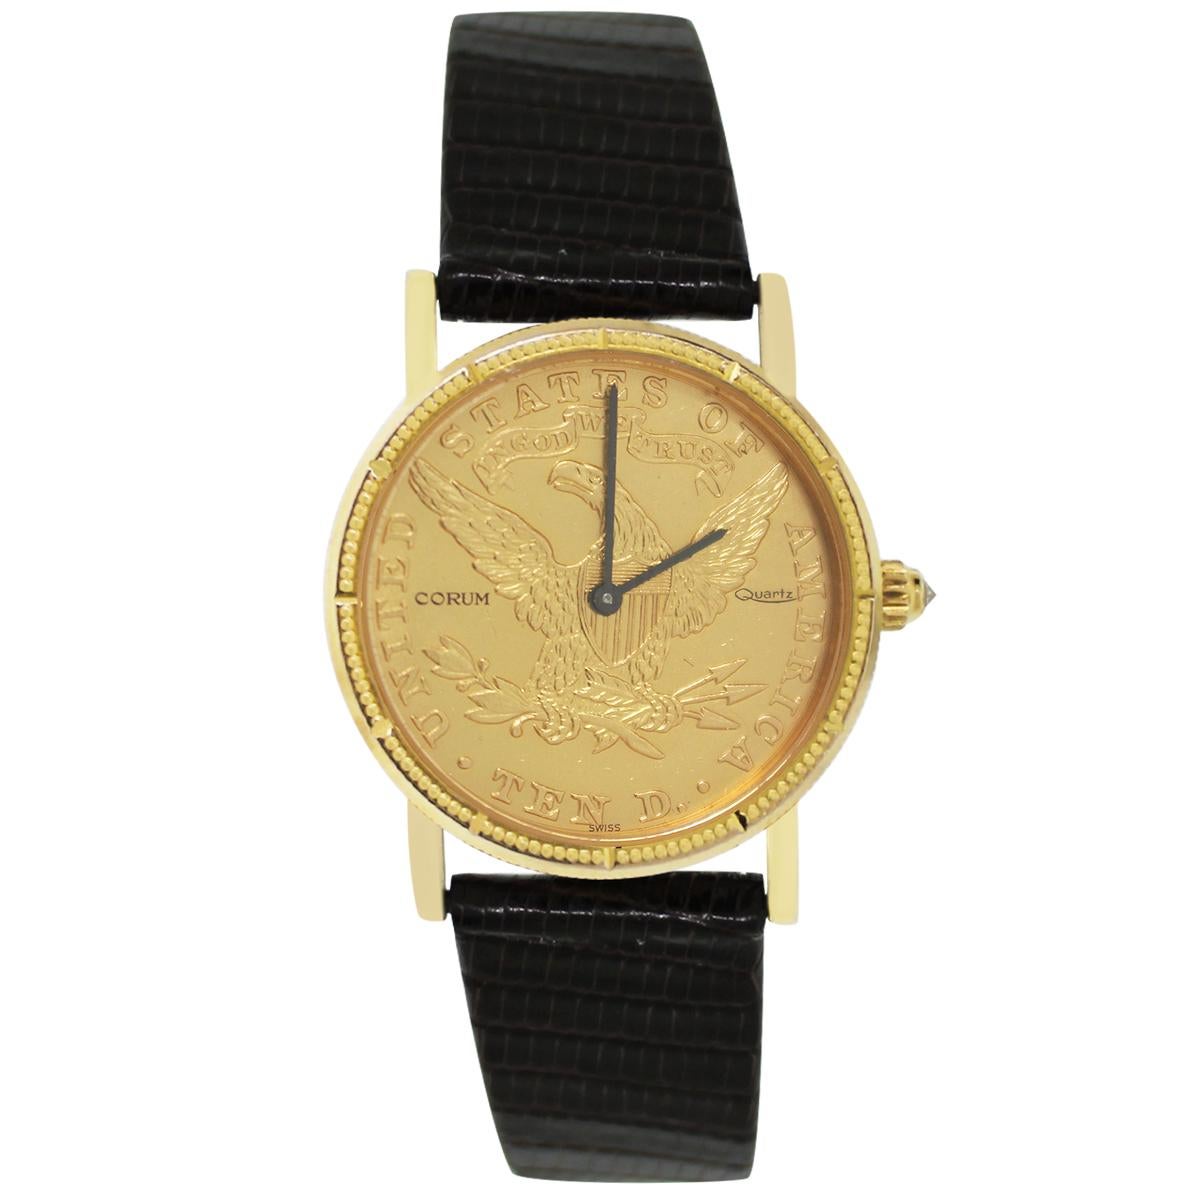 Brand: Corum
MPN: BF505551
Case Material: 18k Yellow Gold
Case Diameter: 28mm
Crystal: Scratch resistant sapphire
Bezel: 18k yellow gold
Dial: $10 coin dial with black hour and minute hands
Bracelet: Genuine lizard leather
Size: Will fit up to an 8″